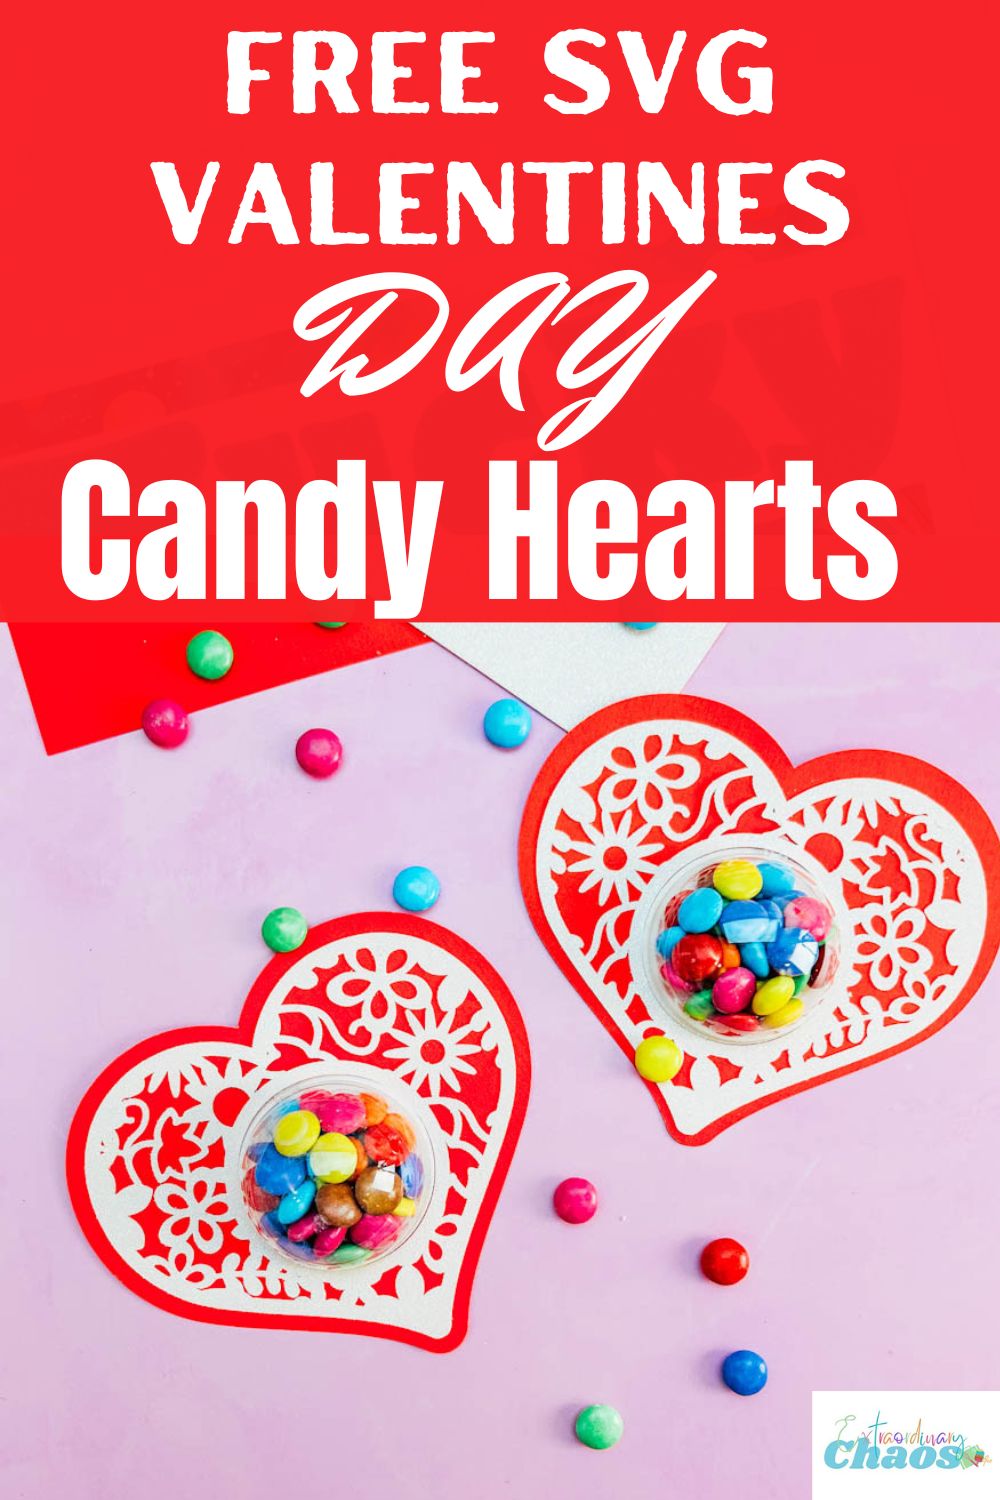 Free SVG Valentines Candy Heart and step by step tutorial for Cricut and Silhouette